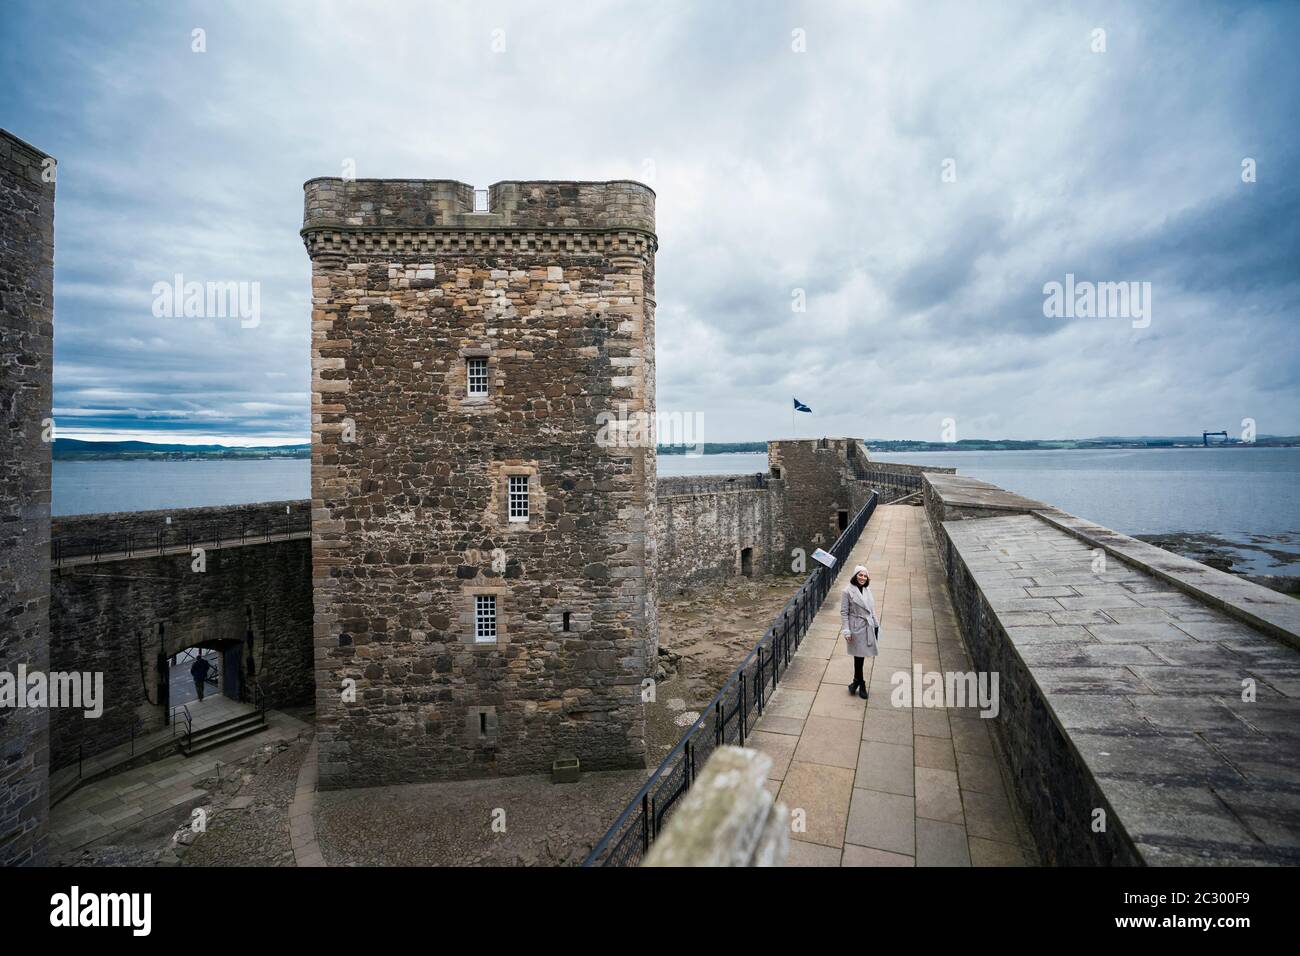 A beautiful woman wearing a warm white fur-collared coat and woolen hat walks down the balcony overlooking Blackness Castle shaped like a ship while v Stock Photo